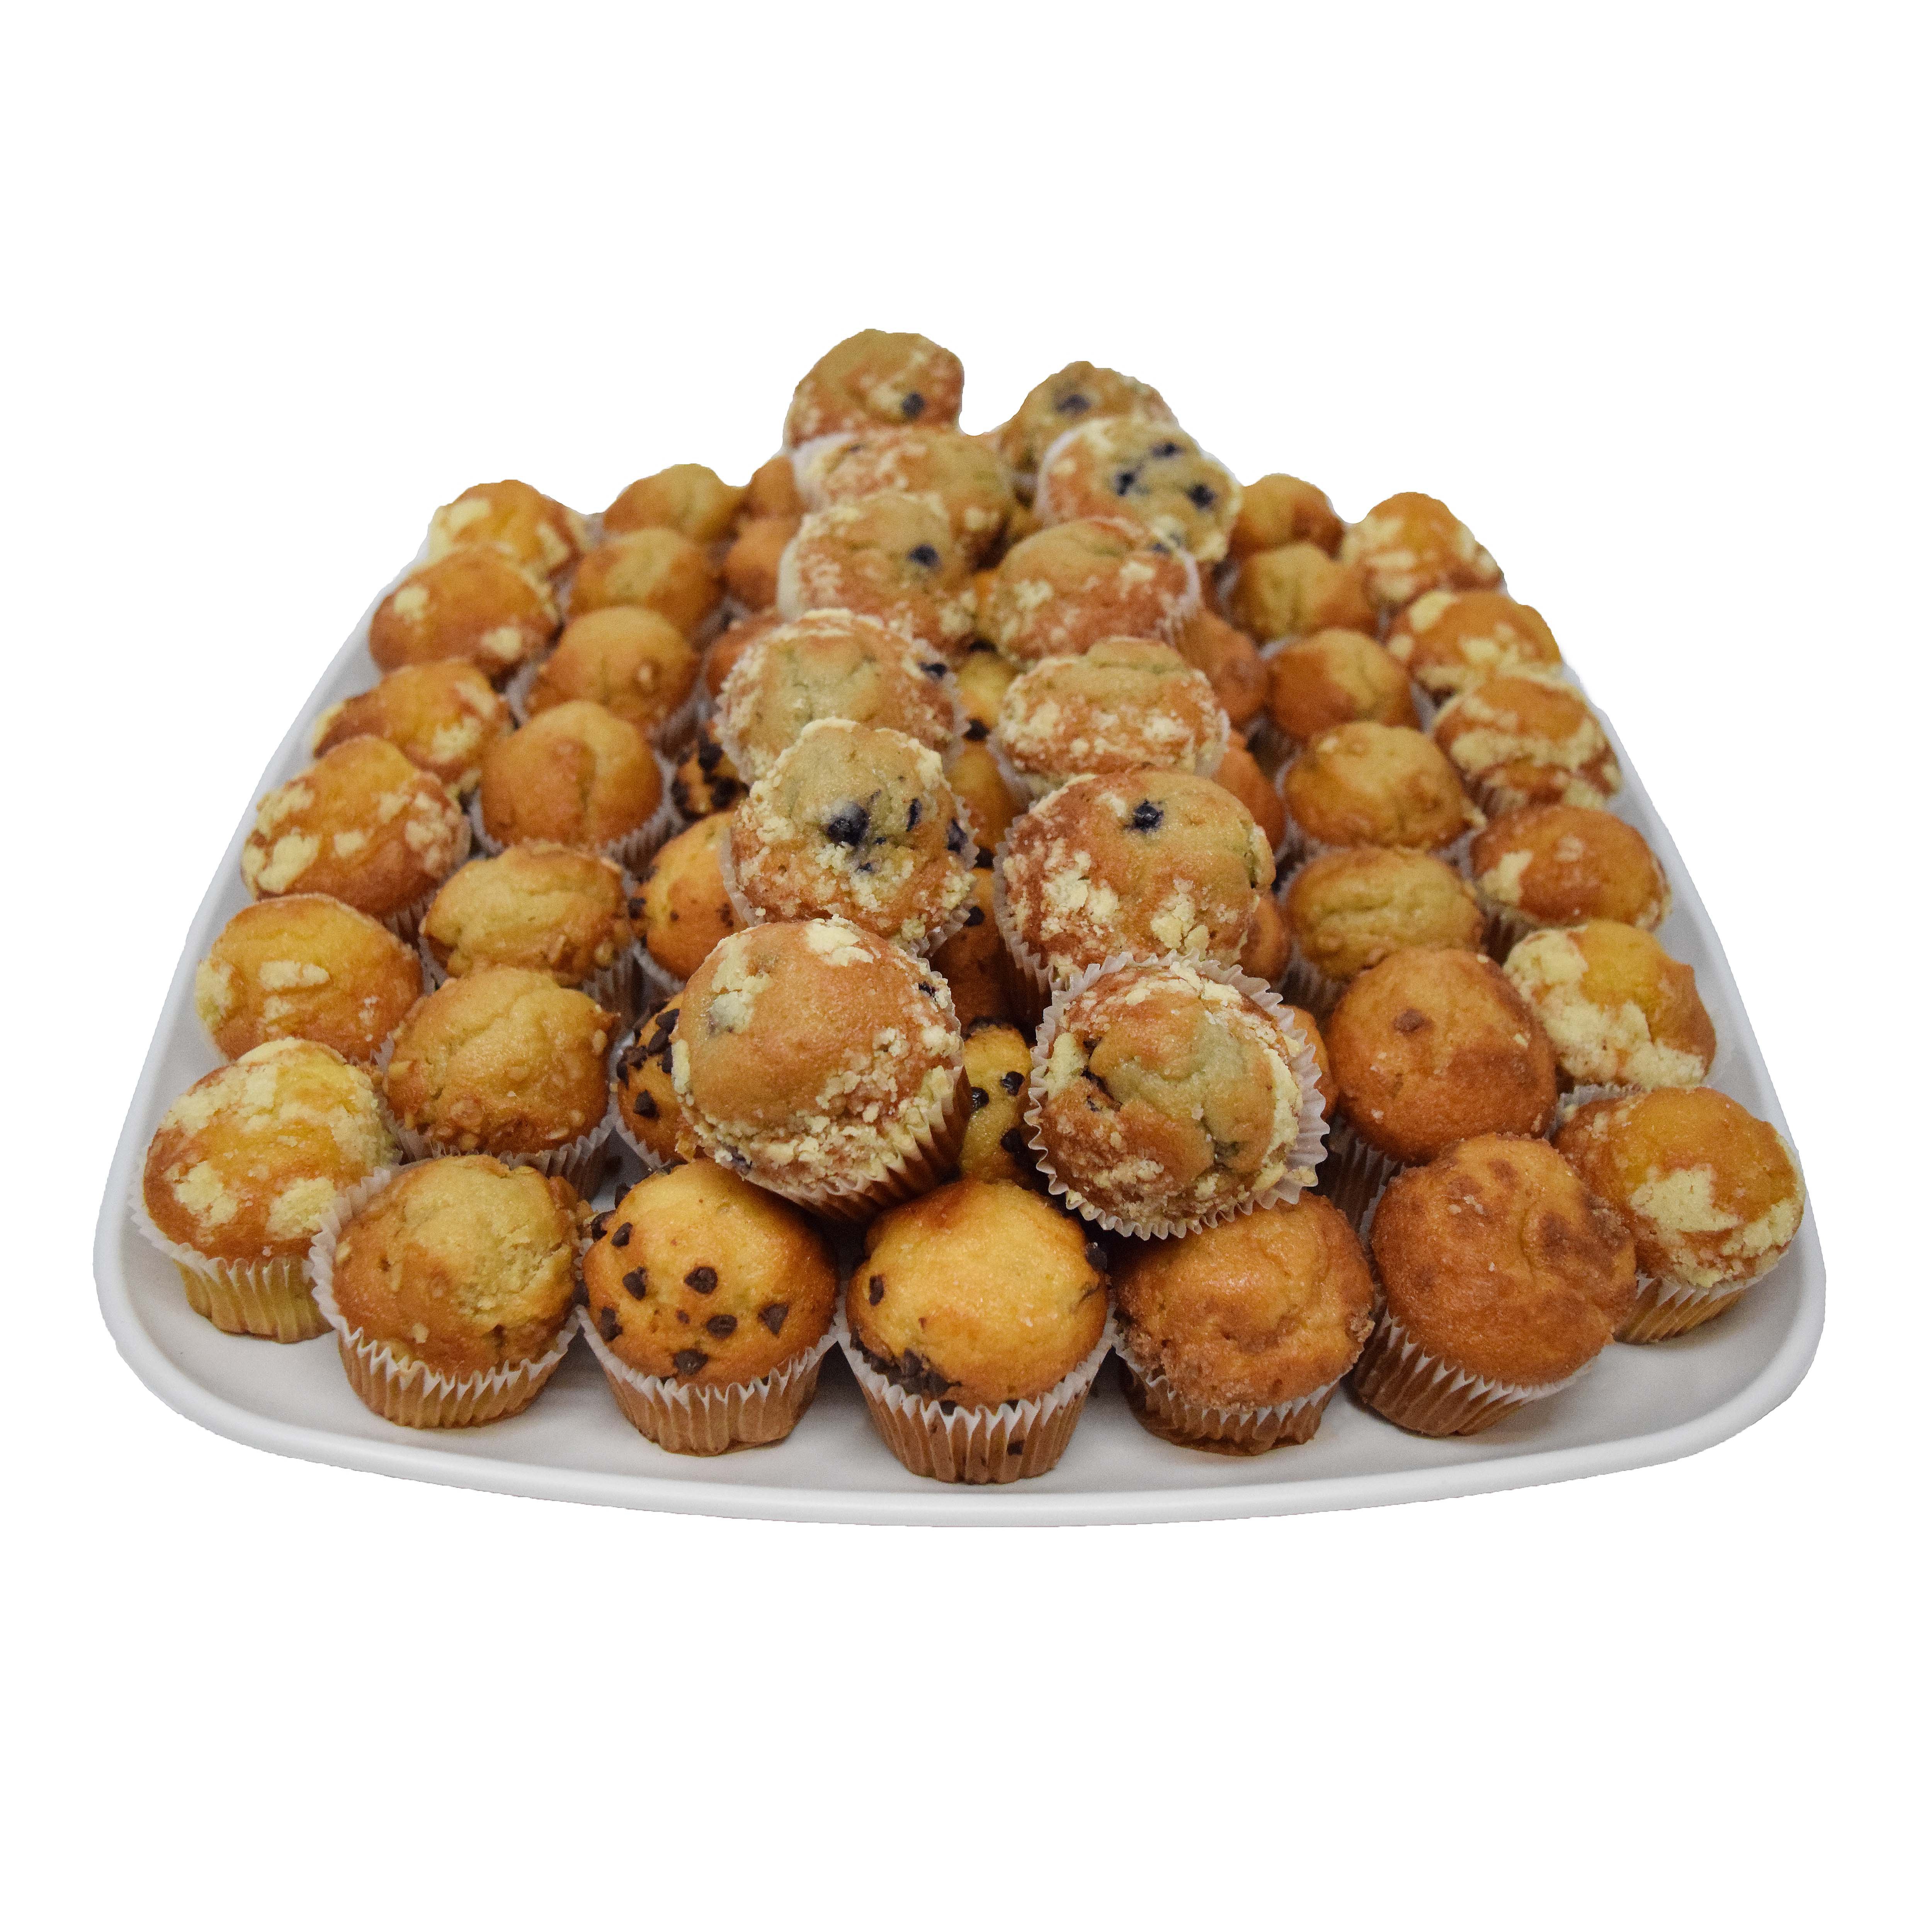 H-E-B Bakery Party Tray - H-E-B Party Shop Trays Standard - Muffins at Mini